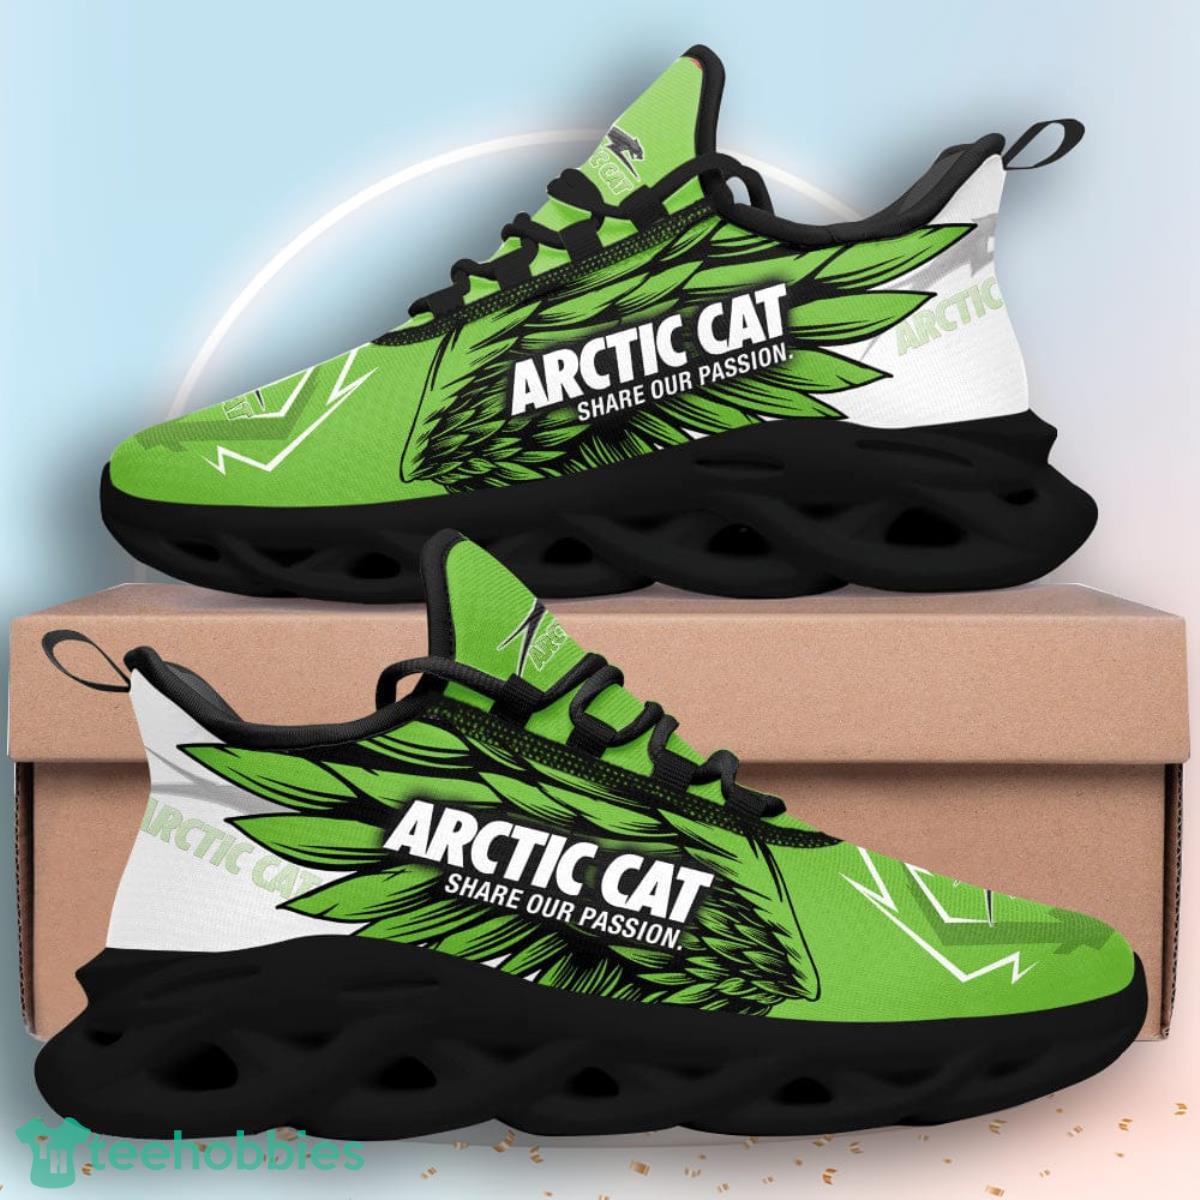 Arctic Cat Team Max Soul Shoes Running Sneakers Product Photo 2